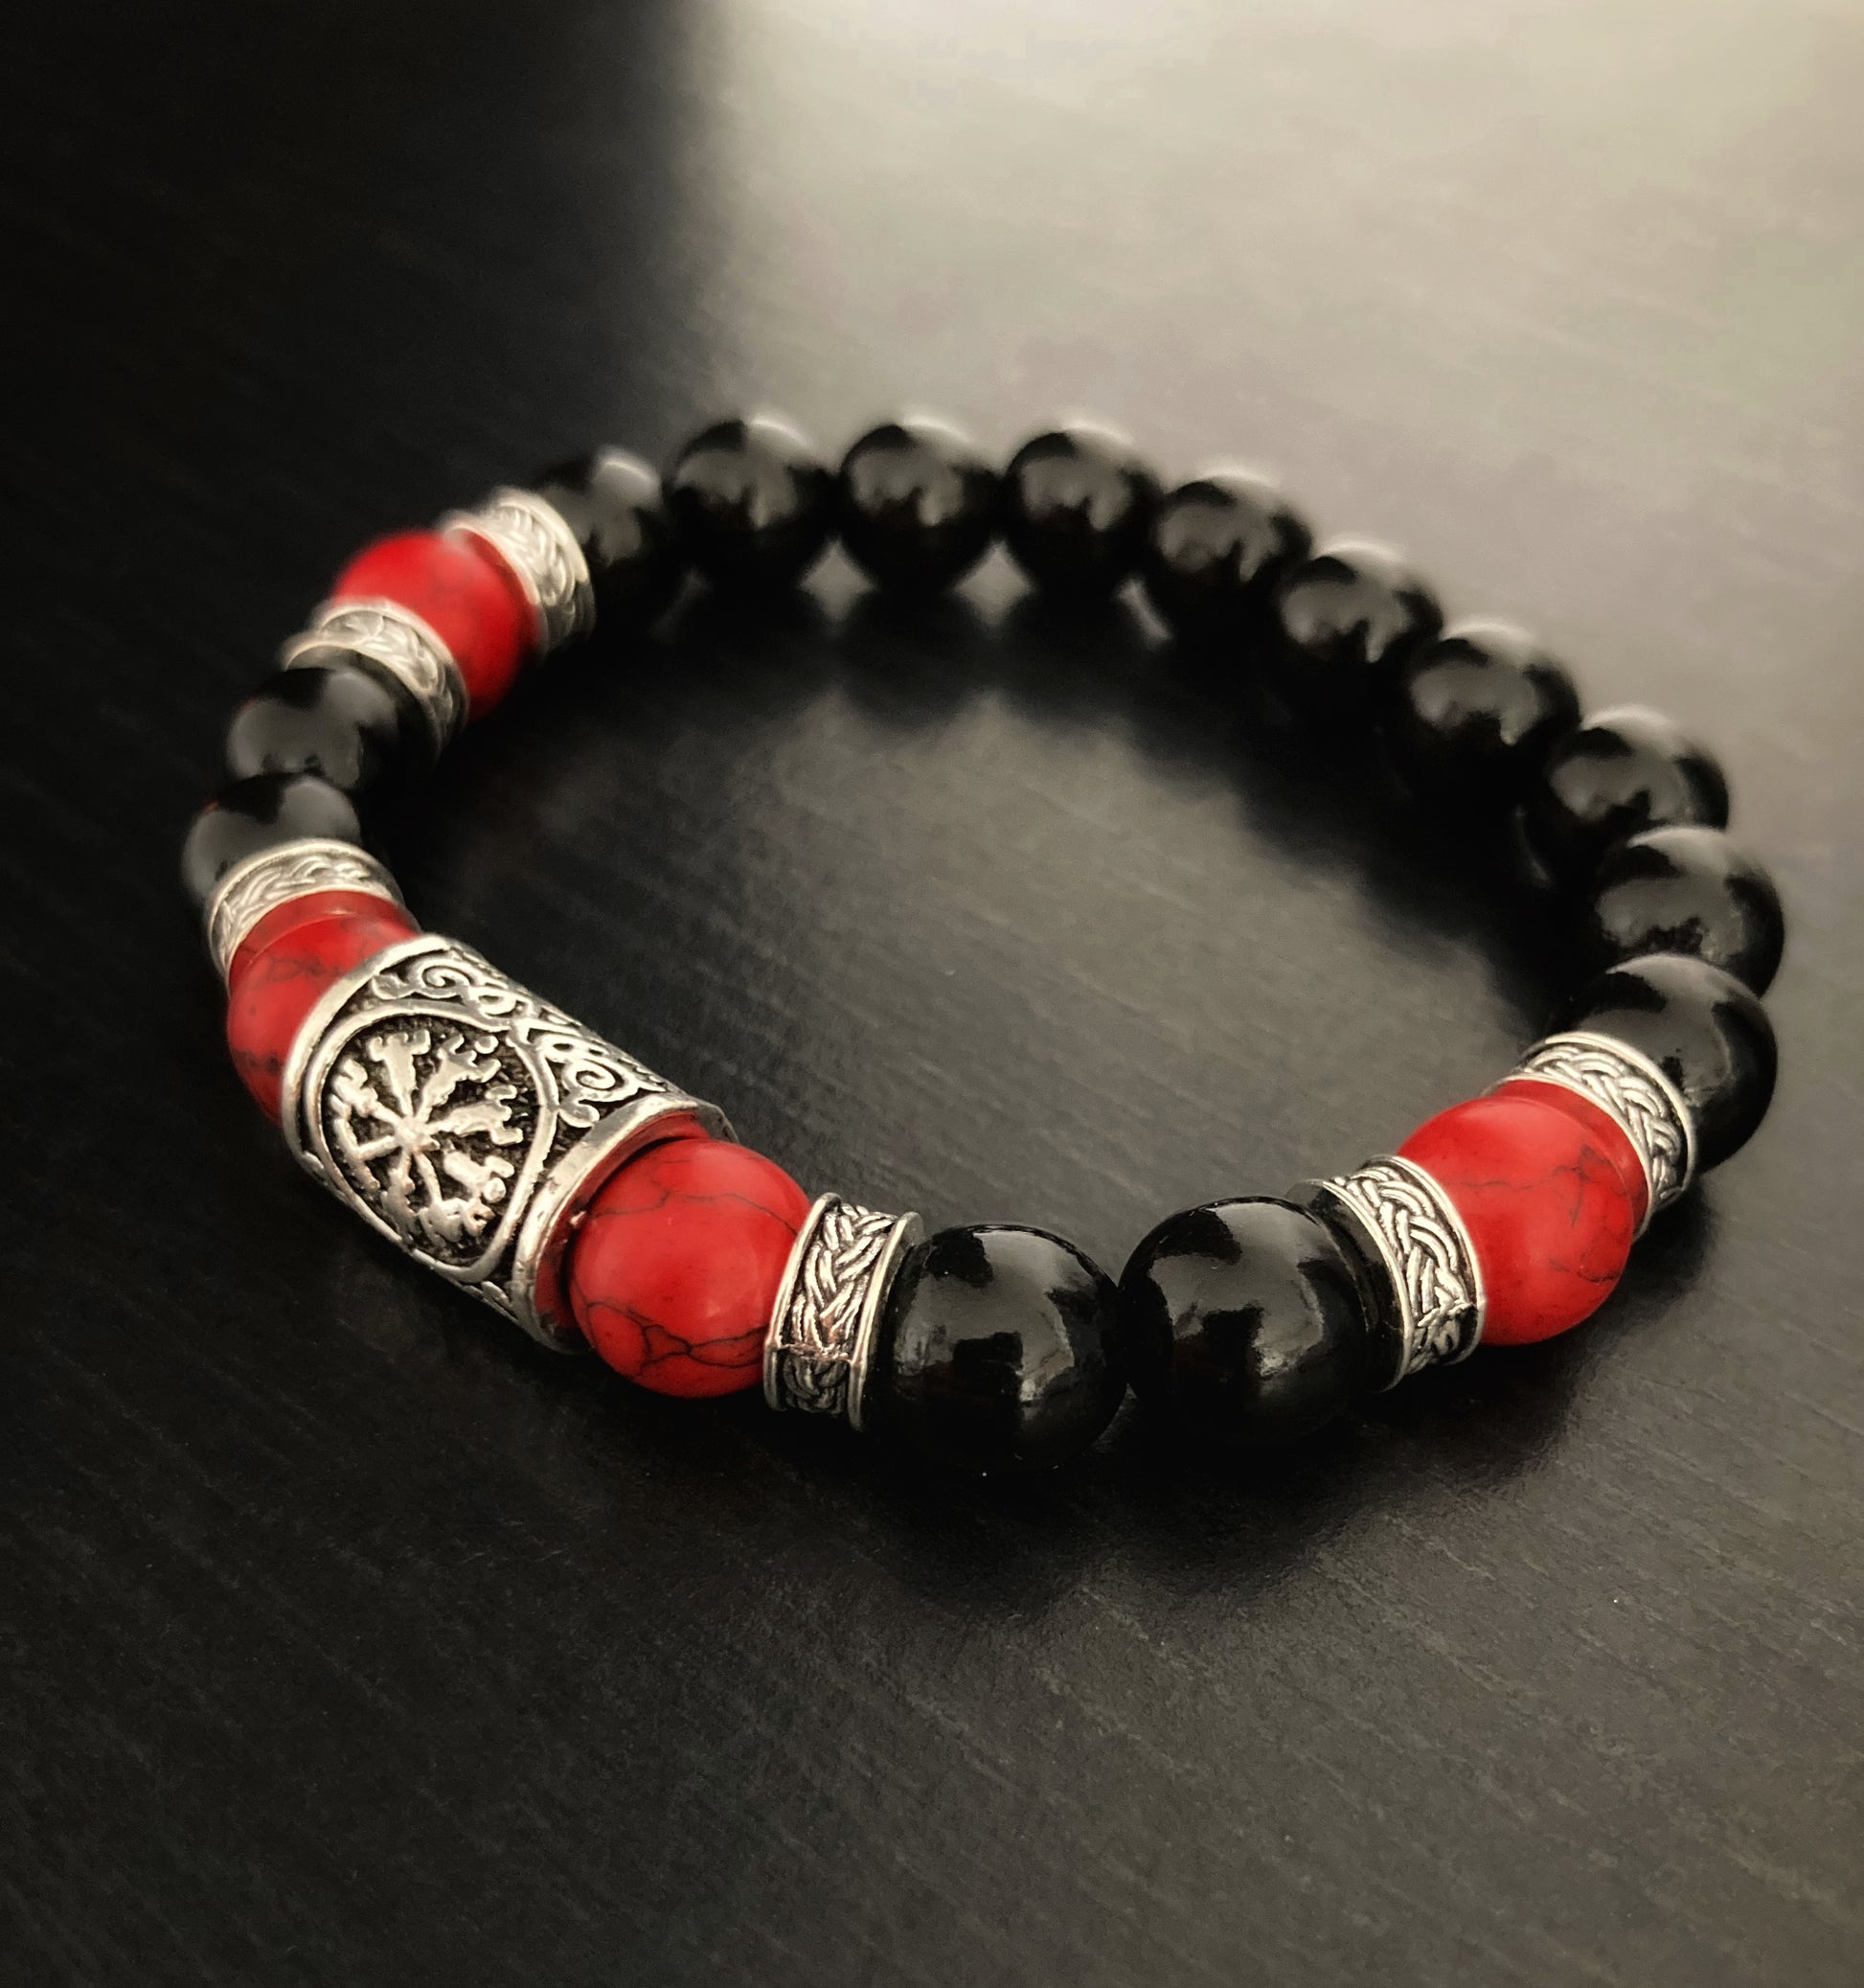 A side view of a beautiful handmade bracelet. With a silver rune bead as the main piece this is then surrounded by both black beads and red turquoise healing beads. There are also metal patterned pieces interspersed throughout and it is stunning.